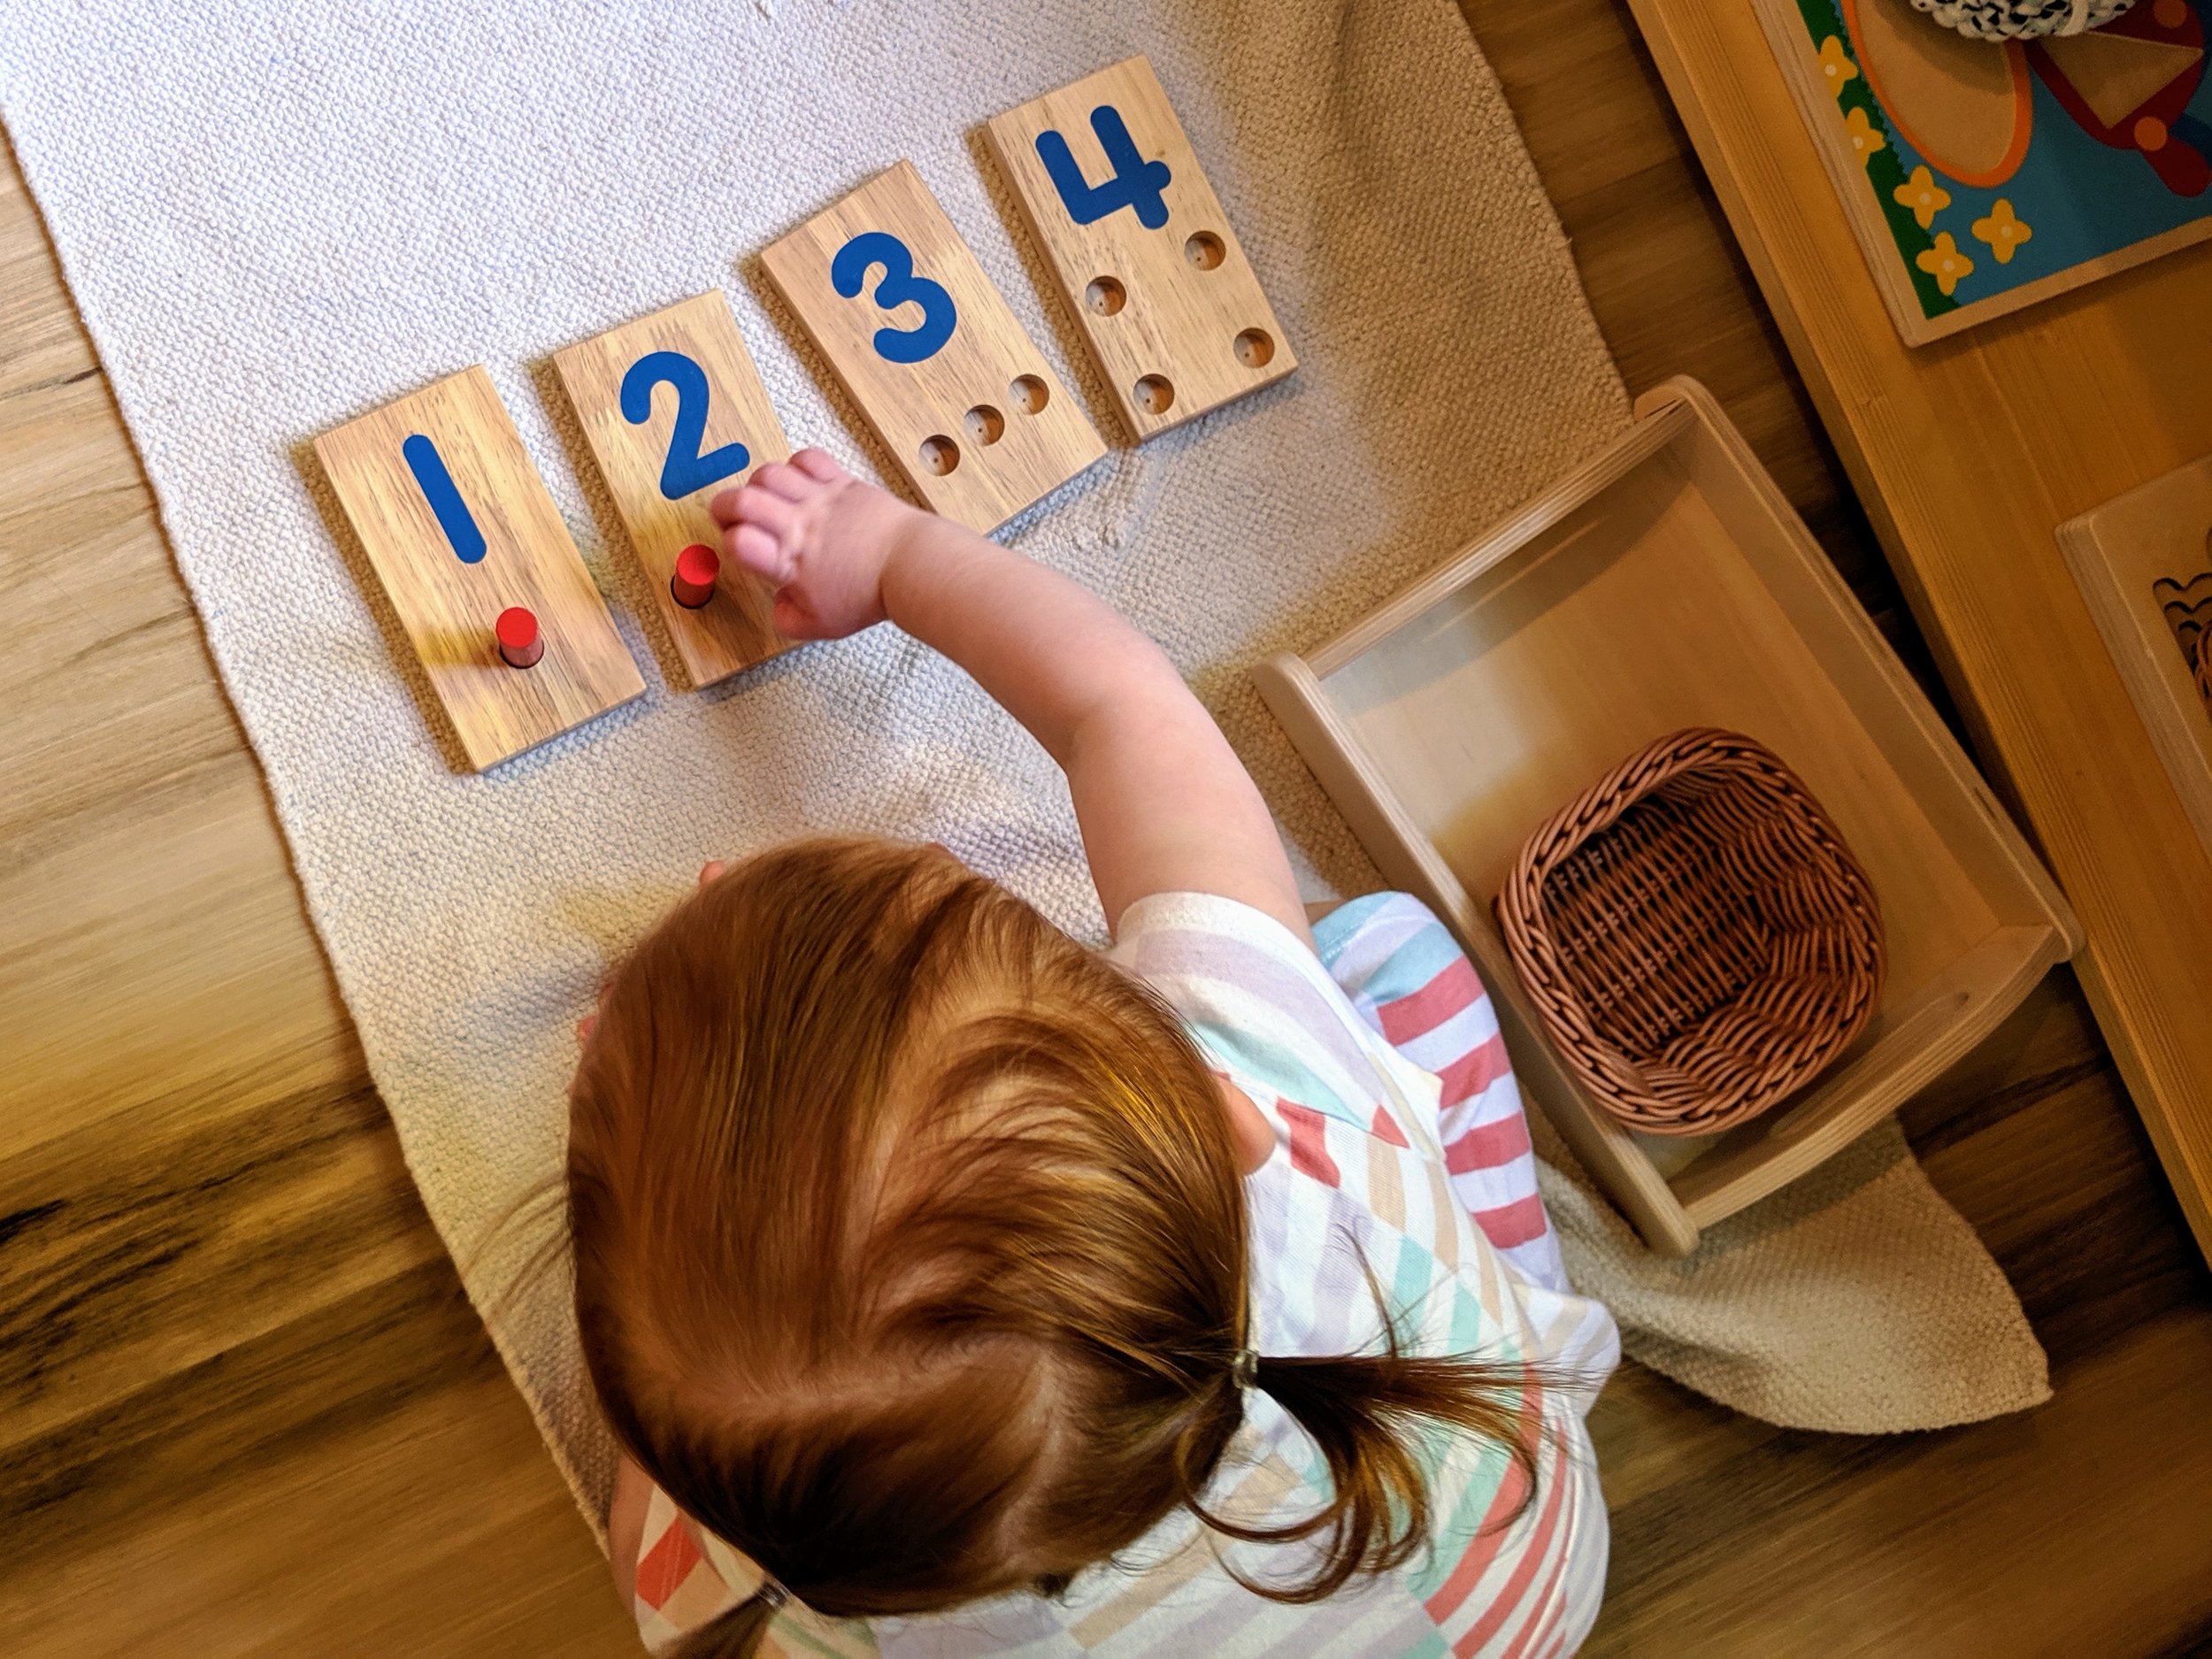 Getting Started With Independent Play